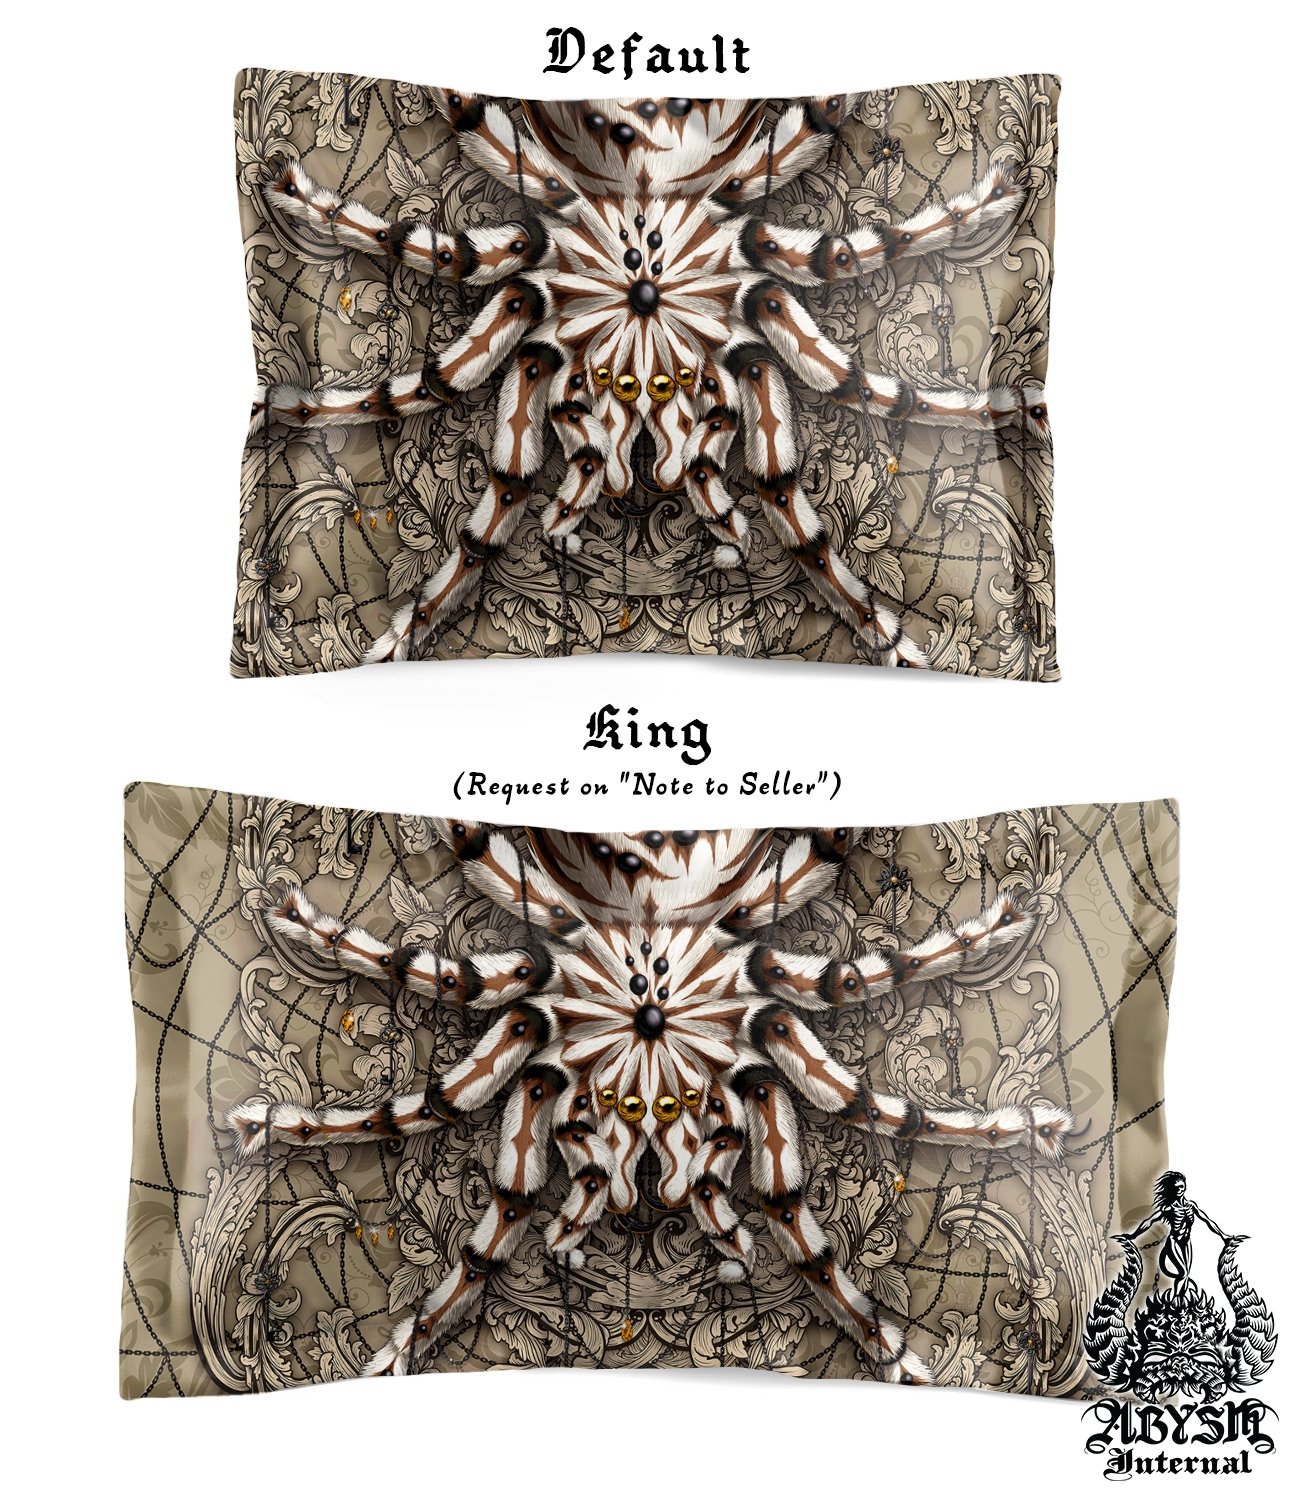 Spider Bedding Set, Comforter and Duvet, Bed Cover and Bedroom Decor, King, Queen and Twin Size - Tarantula Cream - Abysm Internal